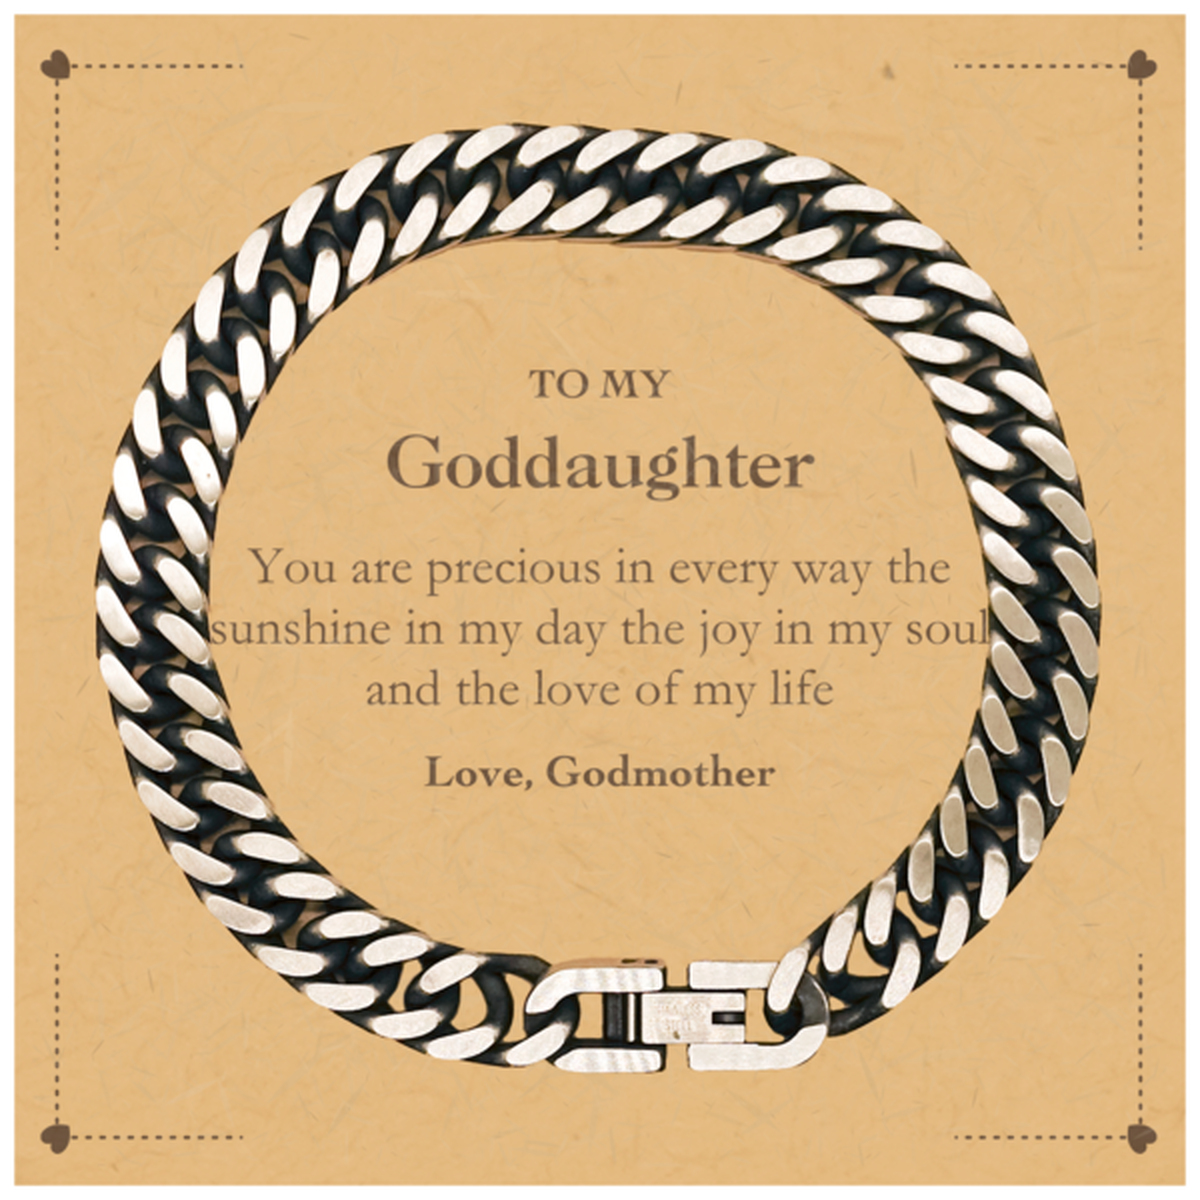 Graduation Gifts for Goddaughter Cuban Link Chain Bracelet Present from Godmother, Christmas Goddaughter Birthday Gifts Goddaughter You are precious in every way the sunshine in my day. Love, Godmother